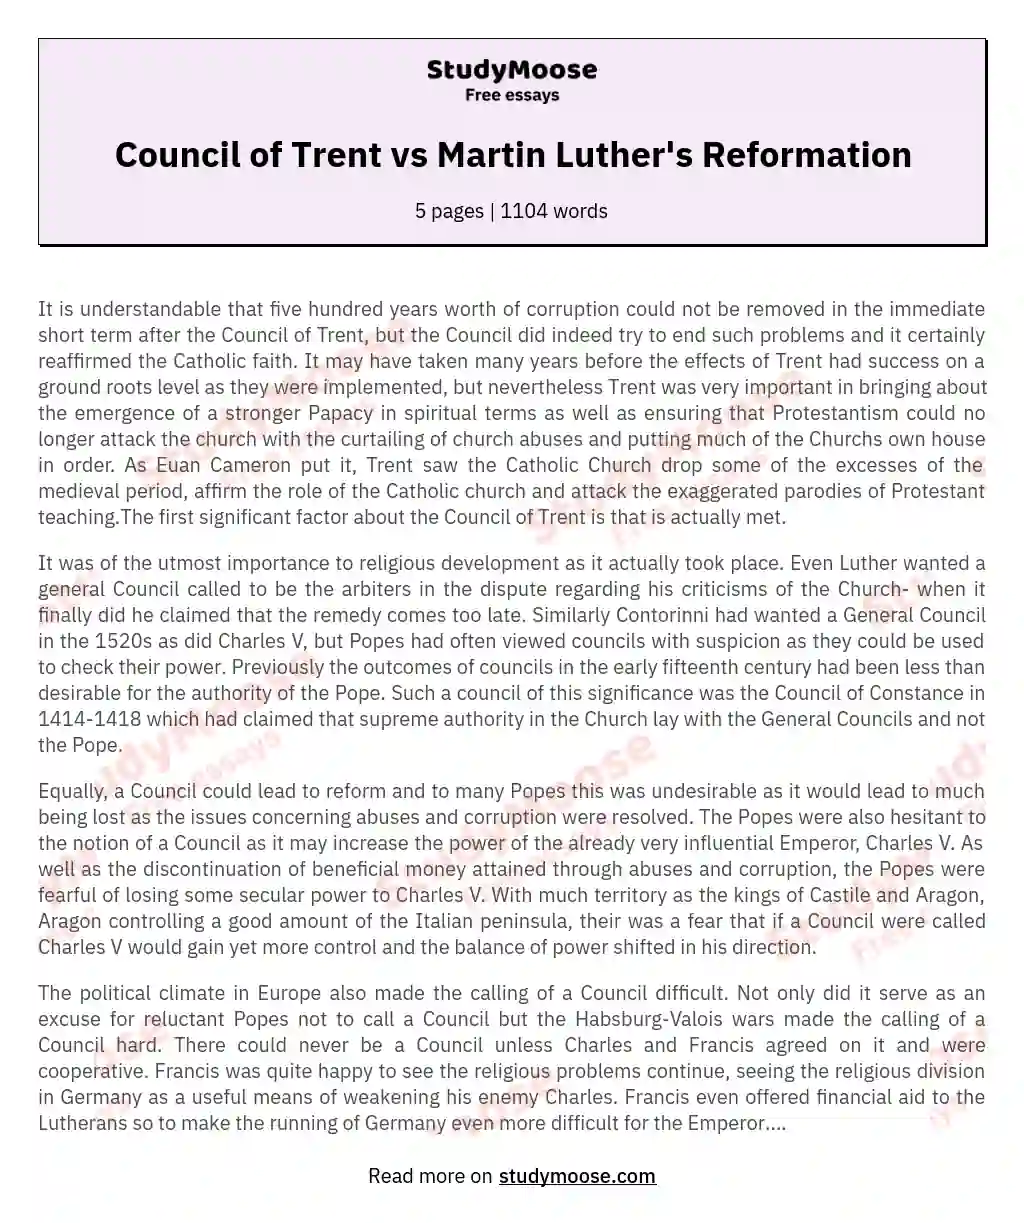 Council of Trent vs Martin Luther's Reformation